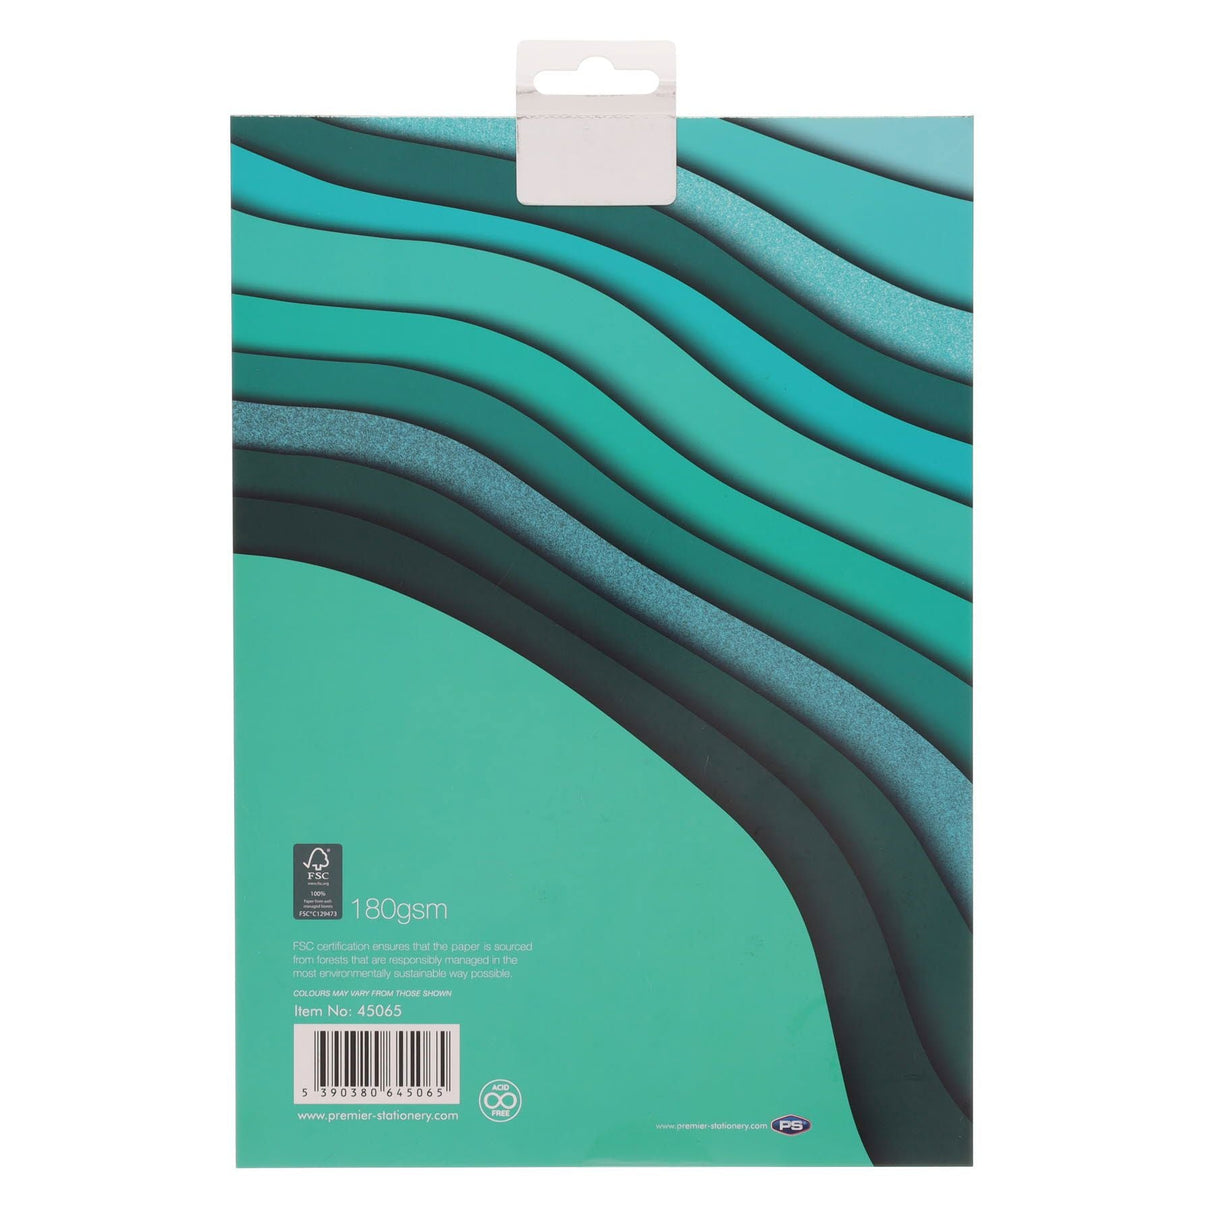 Premier Activity A4 Paper Pad - 24 Sheets - 180gsm - Shades of Aqua-Craft Paper & Card-Premier | Buy Online at Stationery Shop